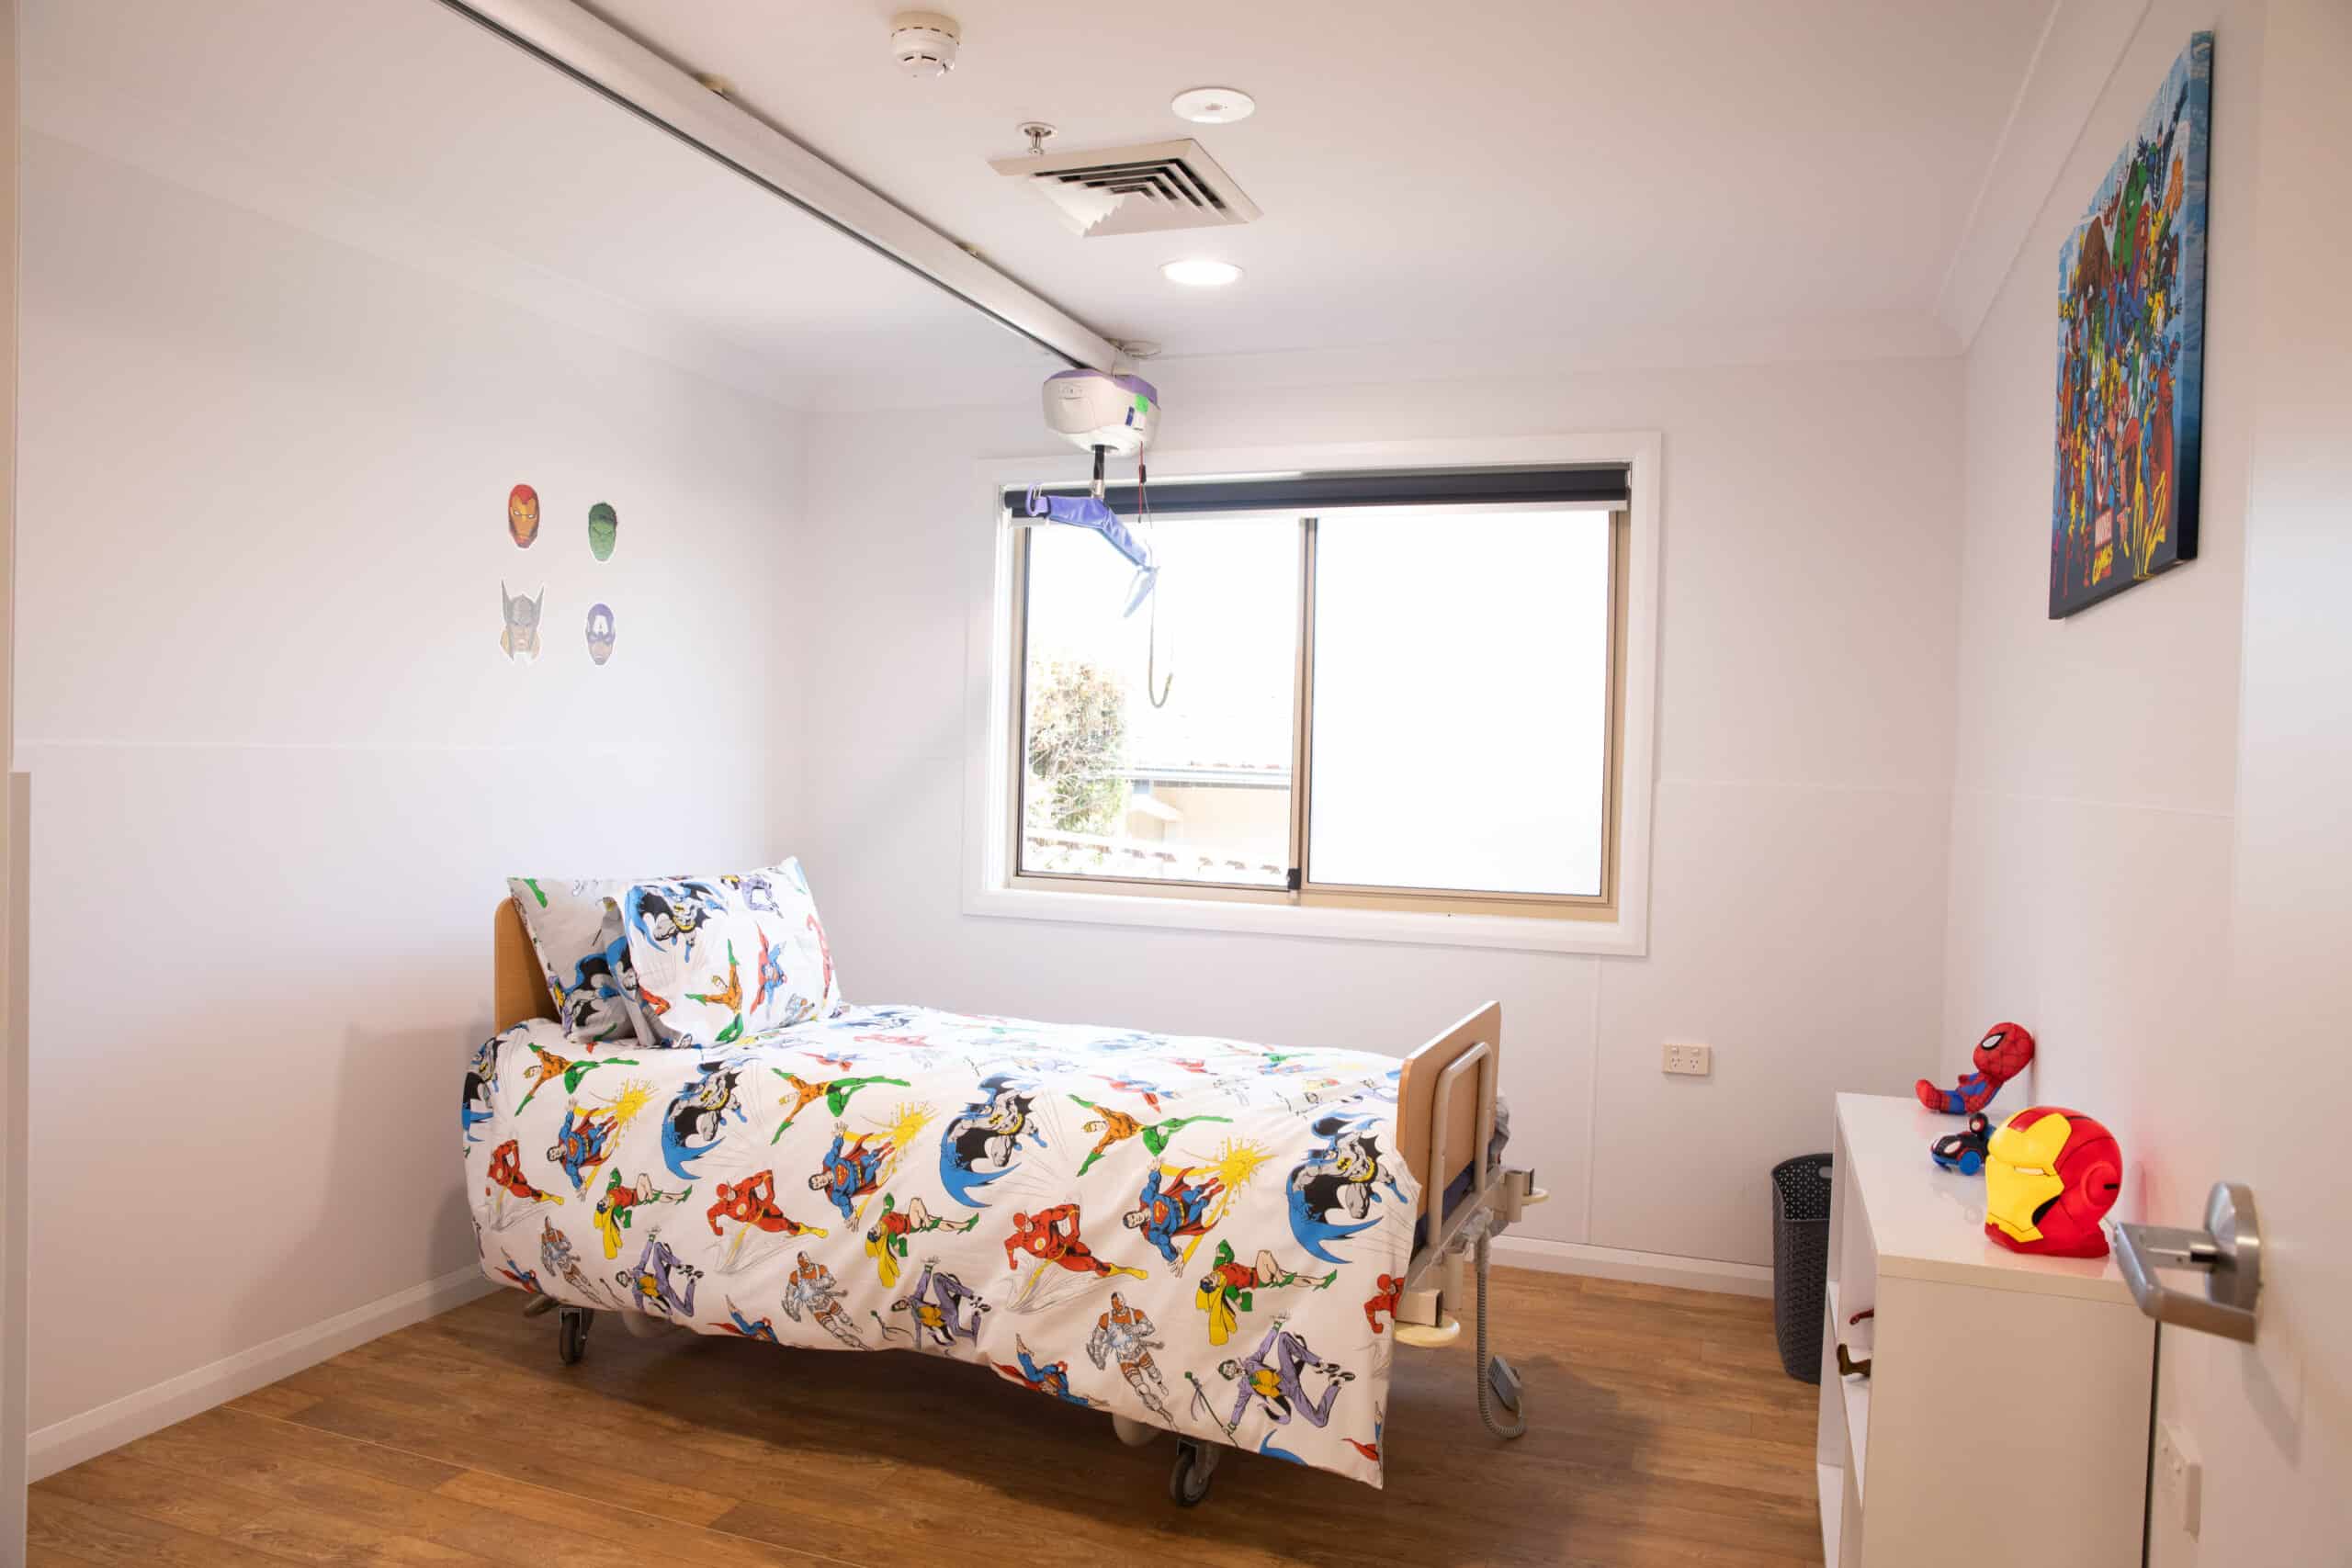 A child's bedroom with a single bed in the middle of the room, a window and some shelves with superhero toys on it.